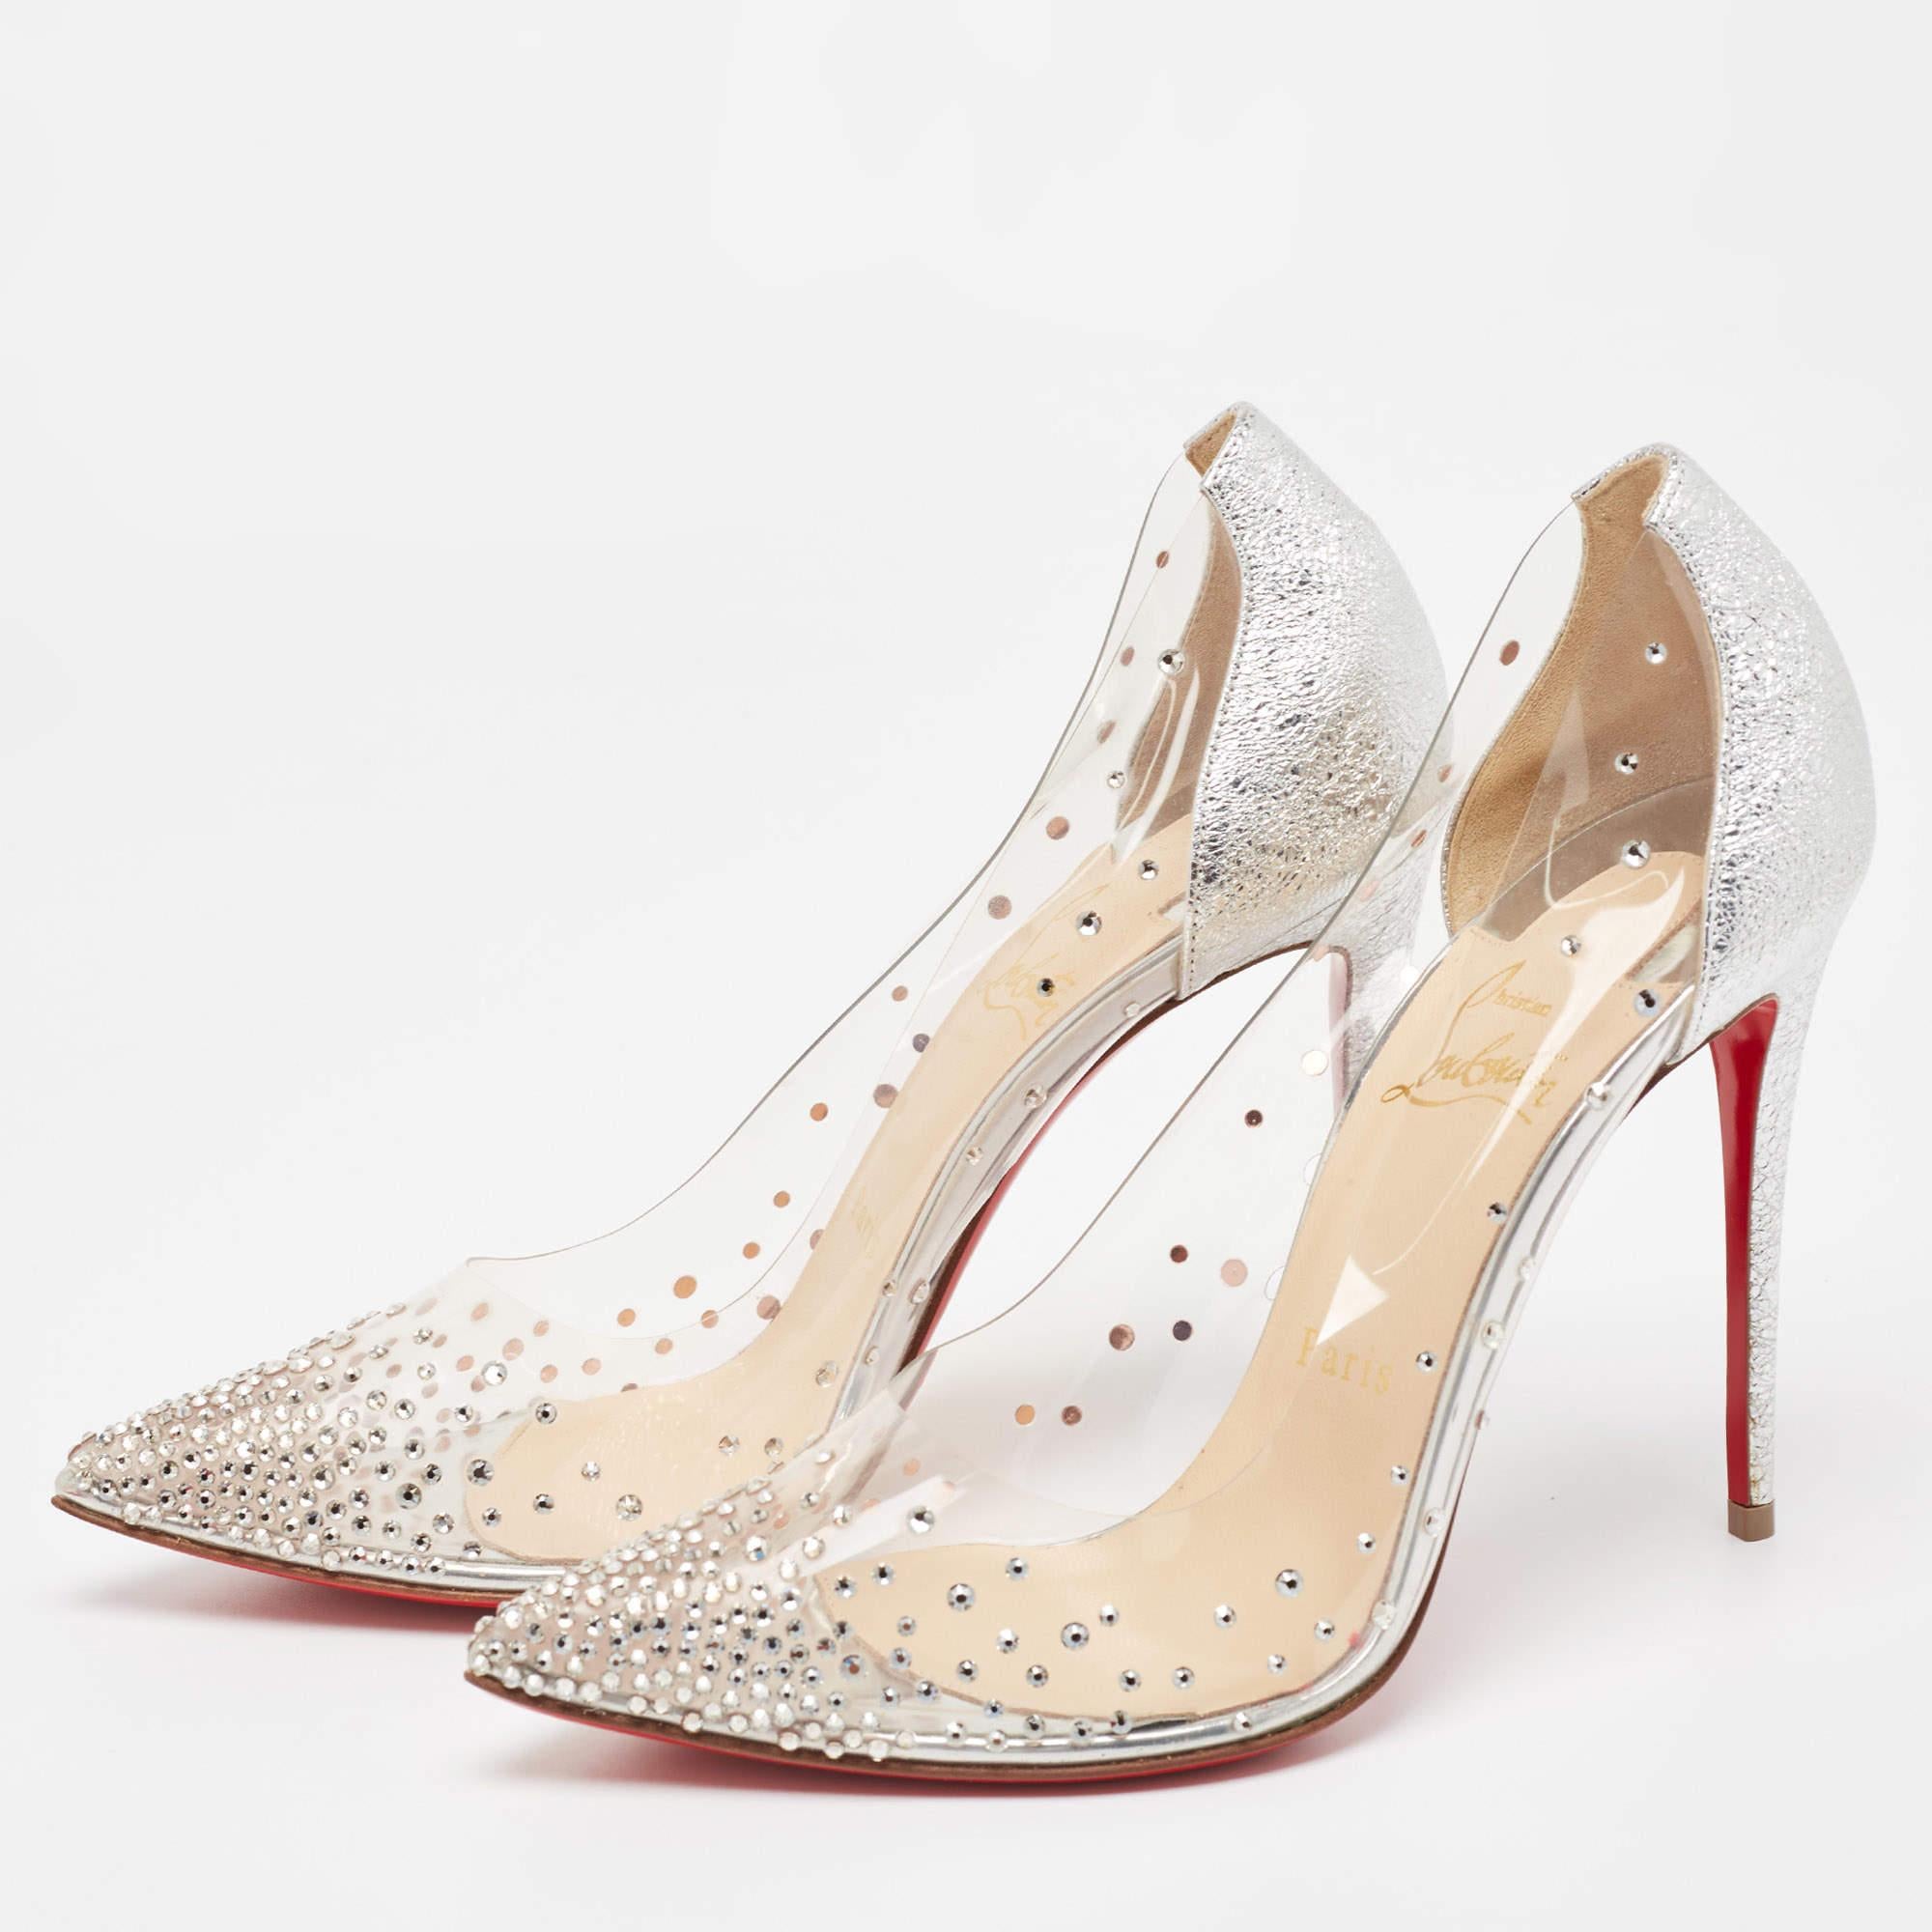 Beige Christian Louboutin Silver Textured Leather and PVC Degrastrass Pumps Size 38.5